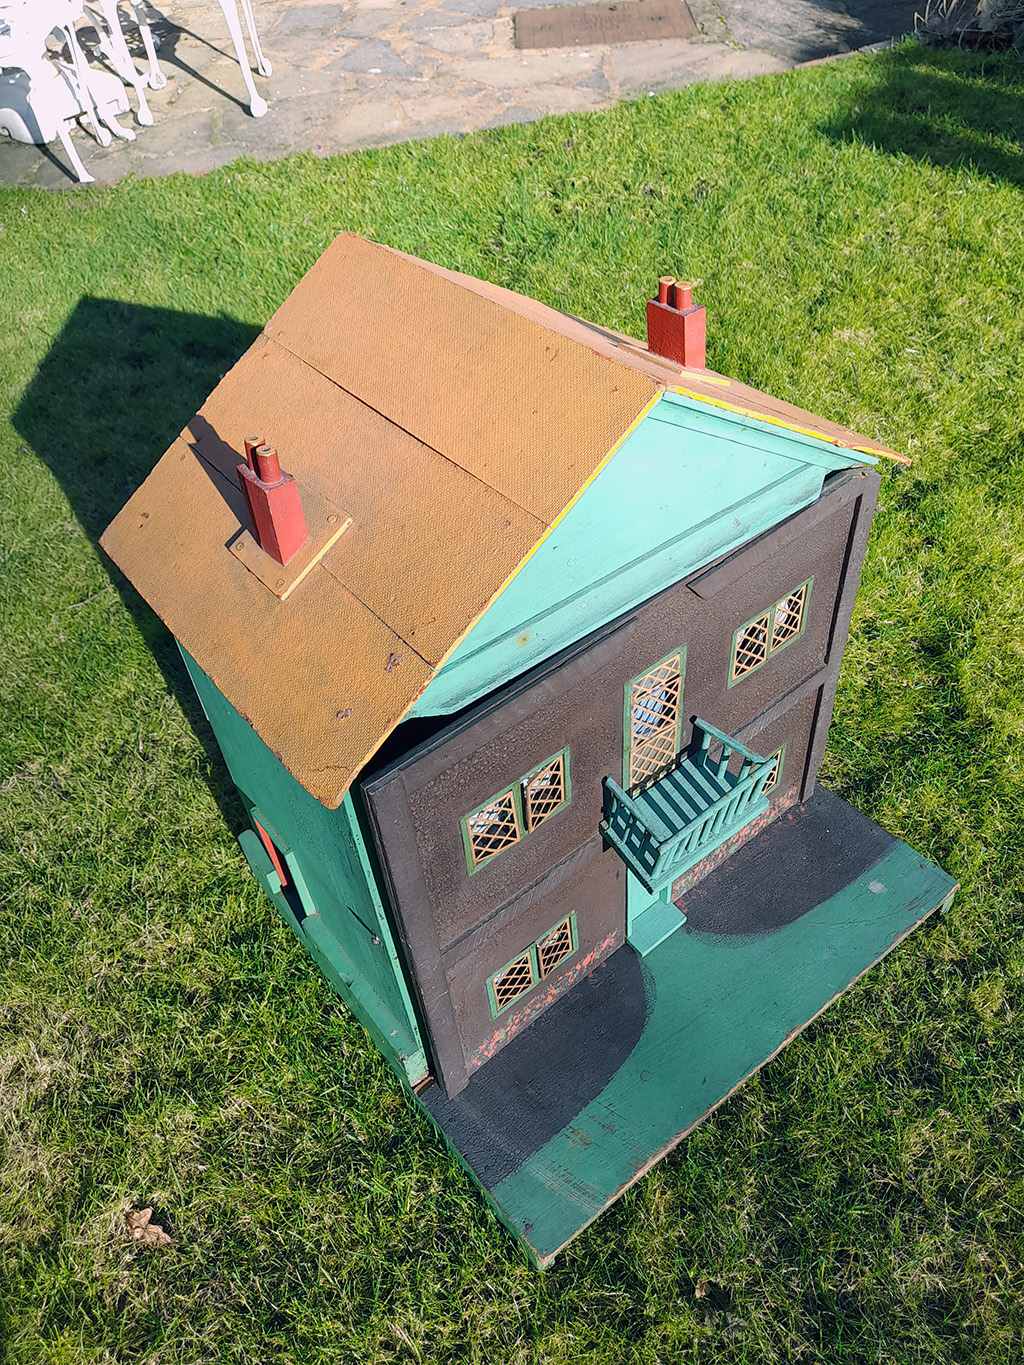 Doll's house painted green with a dark charcoal coloured front and brown roof which has 2 chimneys